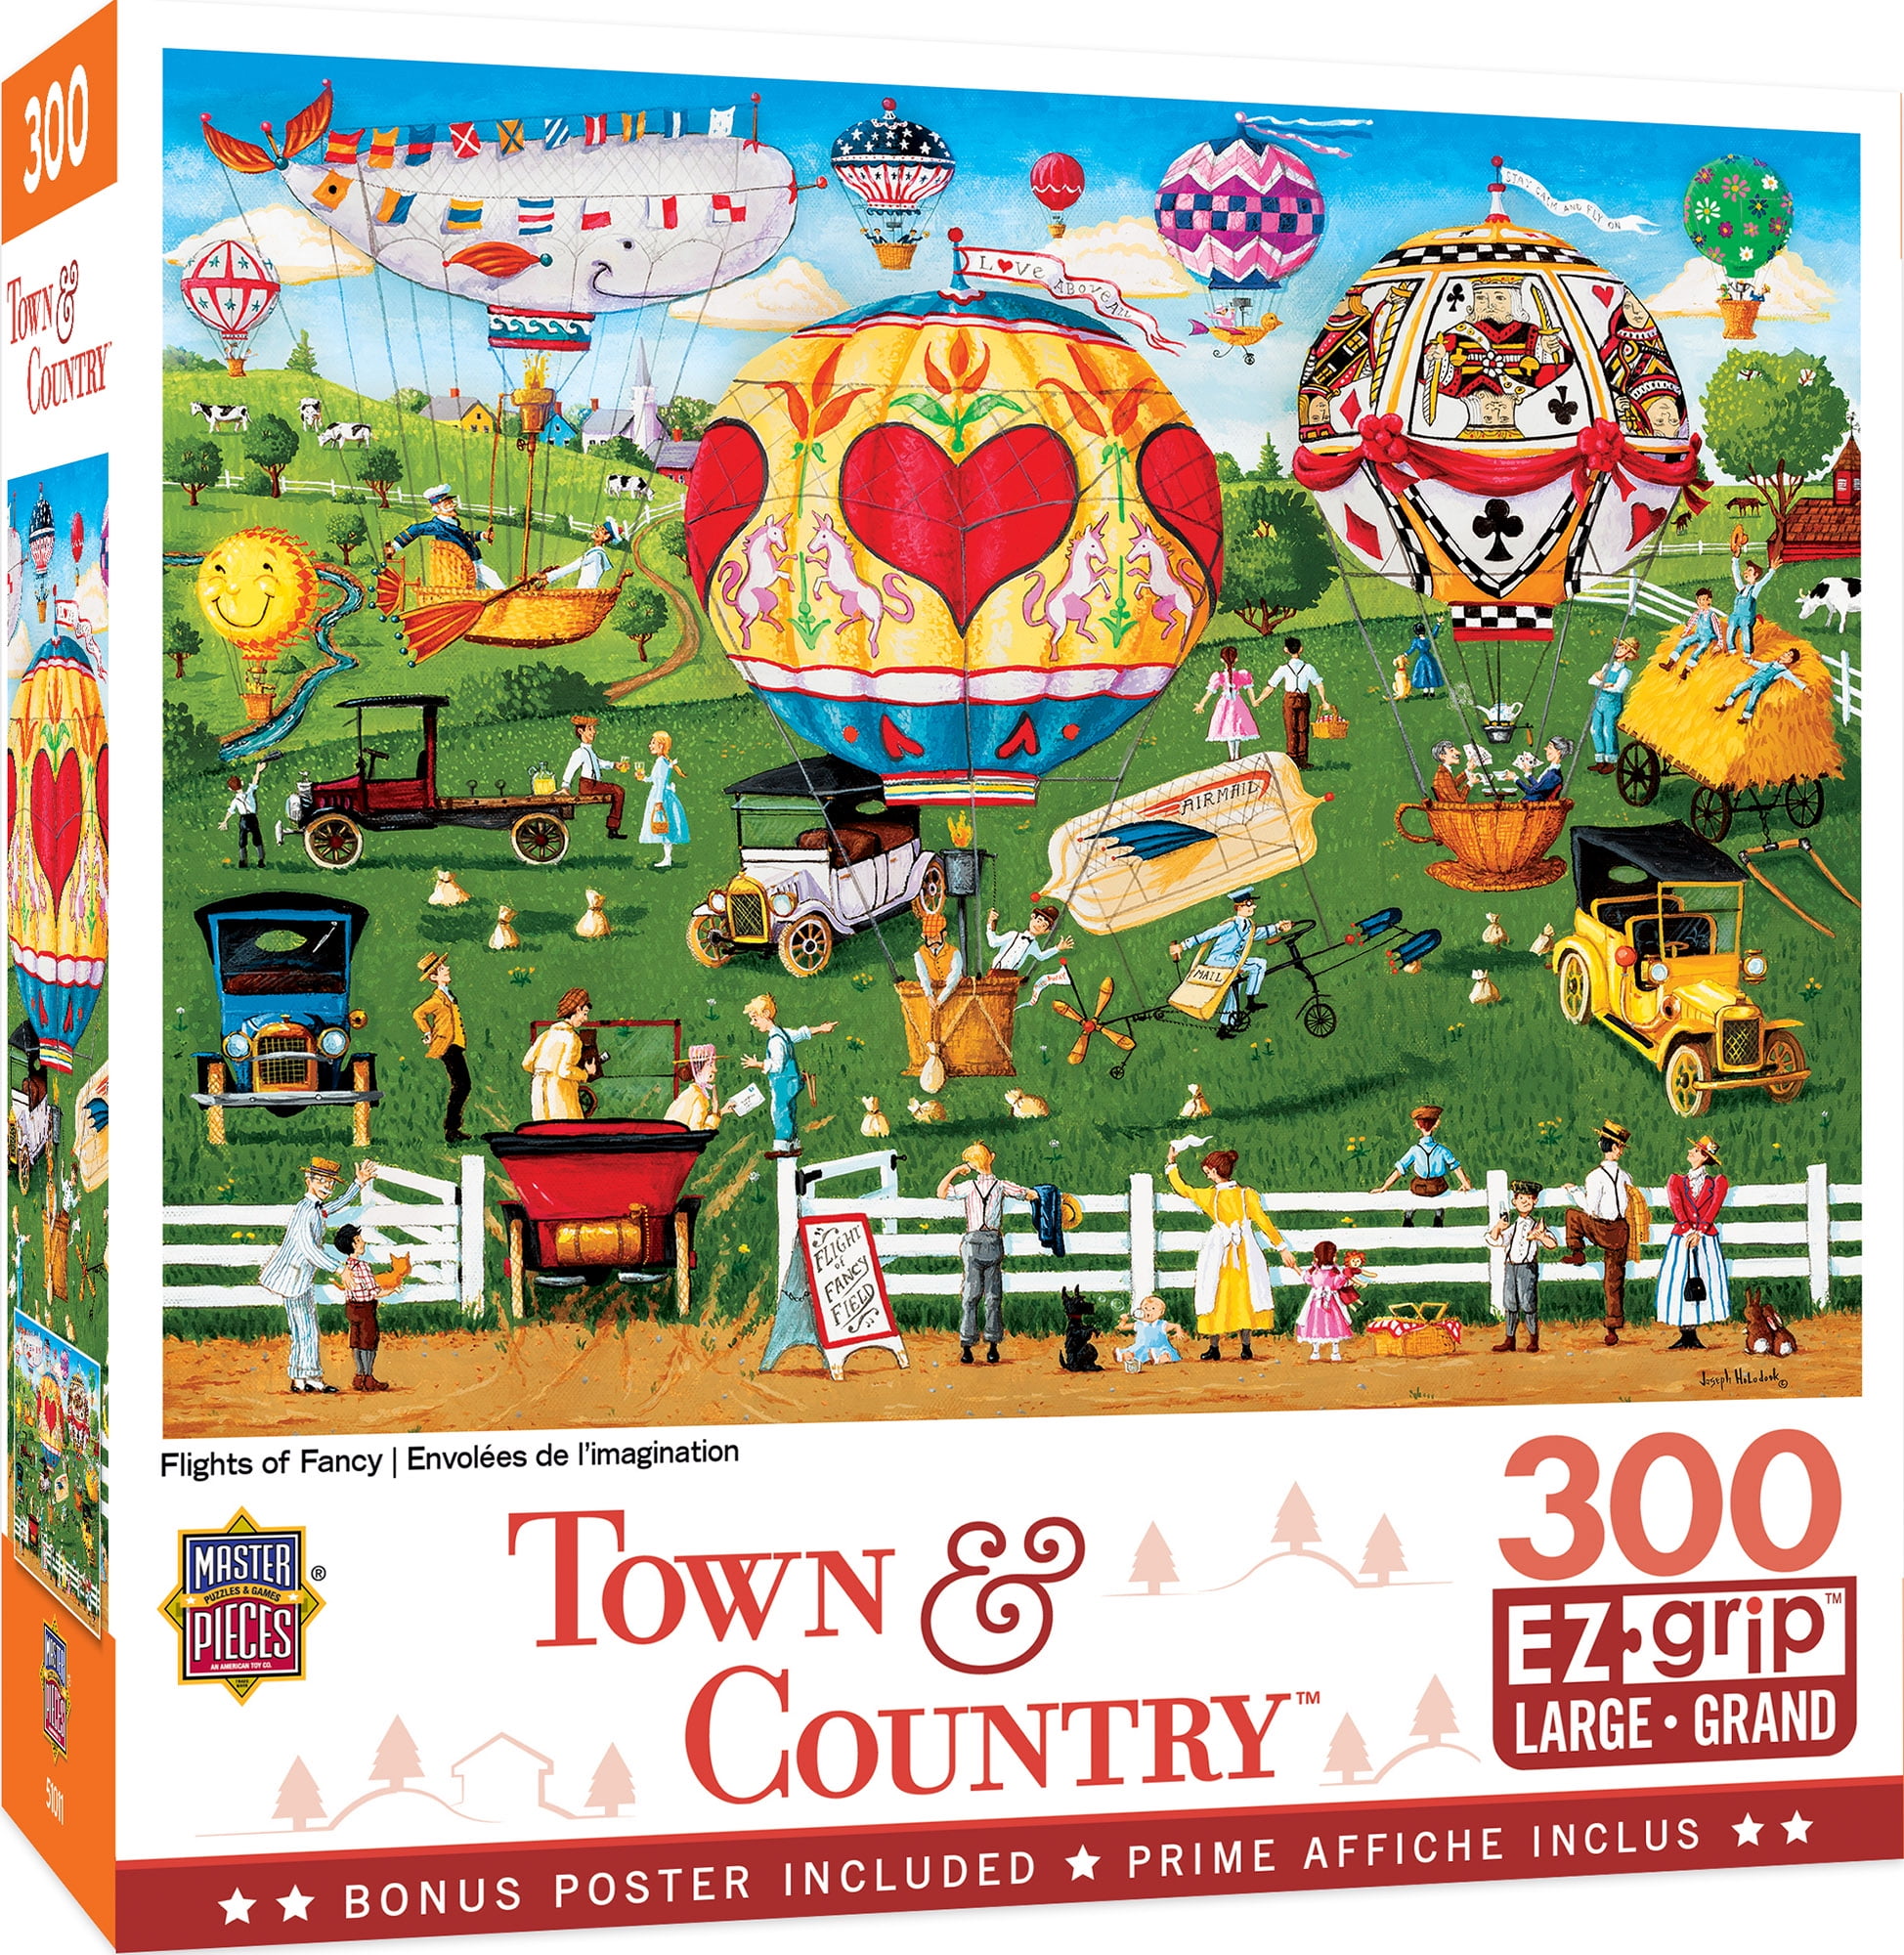 Tiny Bubbles Vivid Collection 300 Large Piece Jigsaw Puzzle Buffalo Games 